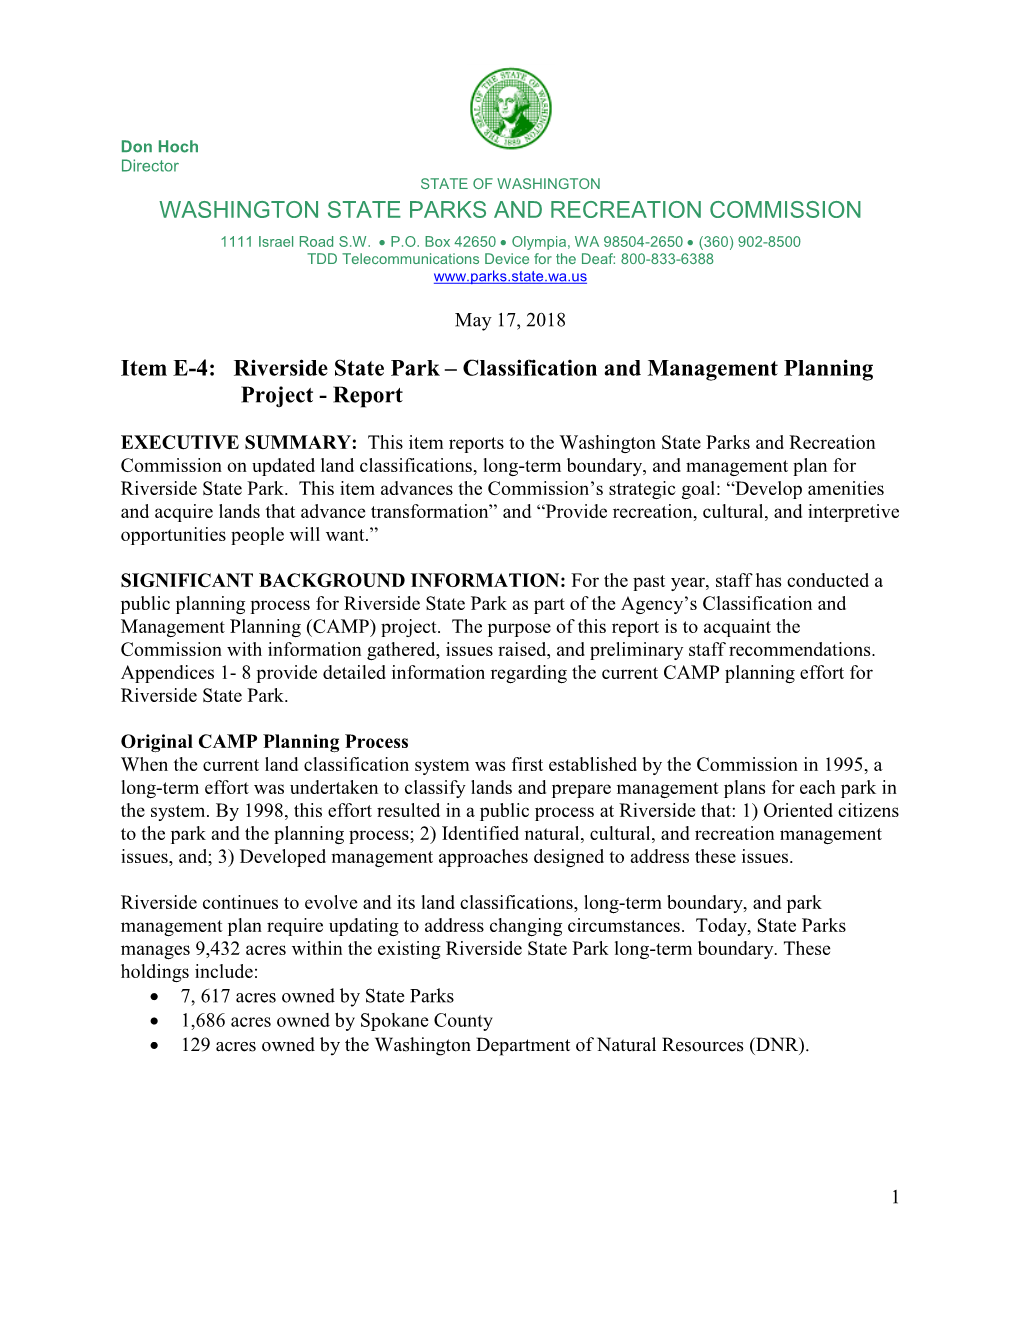 WASHINGTON STATE PARKS and RECREATION COMMISSION Item E-4: Riverside State Park – Classification and Management Planning